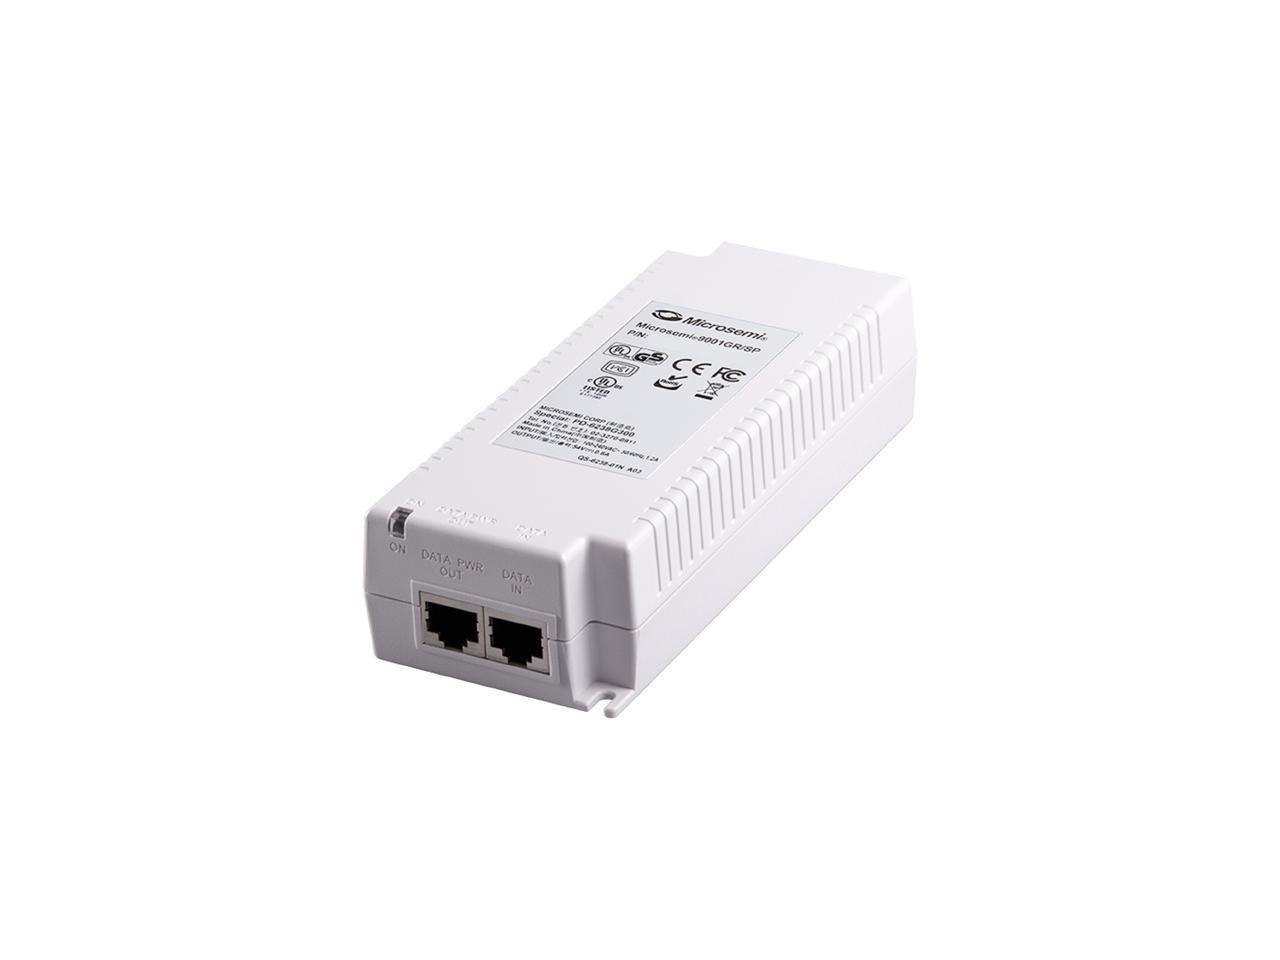 Microsemi Pd-9001Gr/Sp/Ac-Us 30W 1-Port Injector With Surge Protection